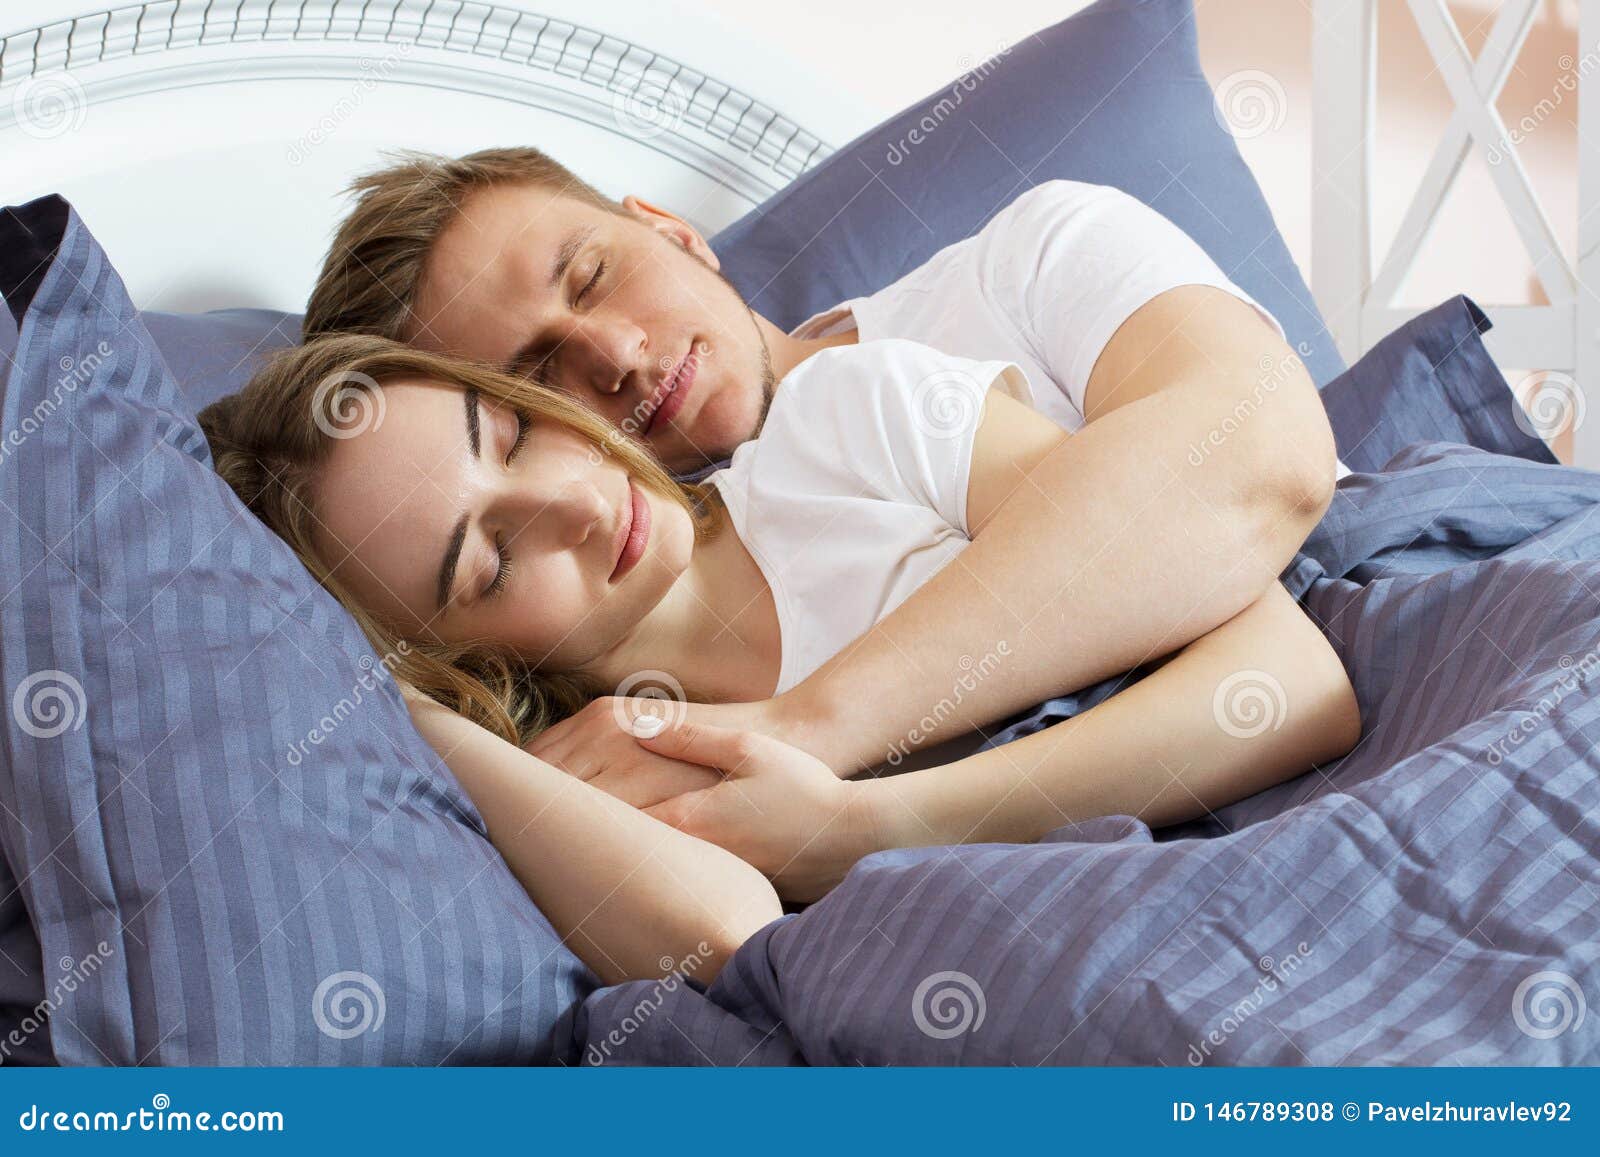 Young Cute Couple Sleeping Together in Bed Stock Photo - Image of ...